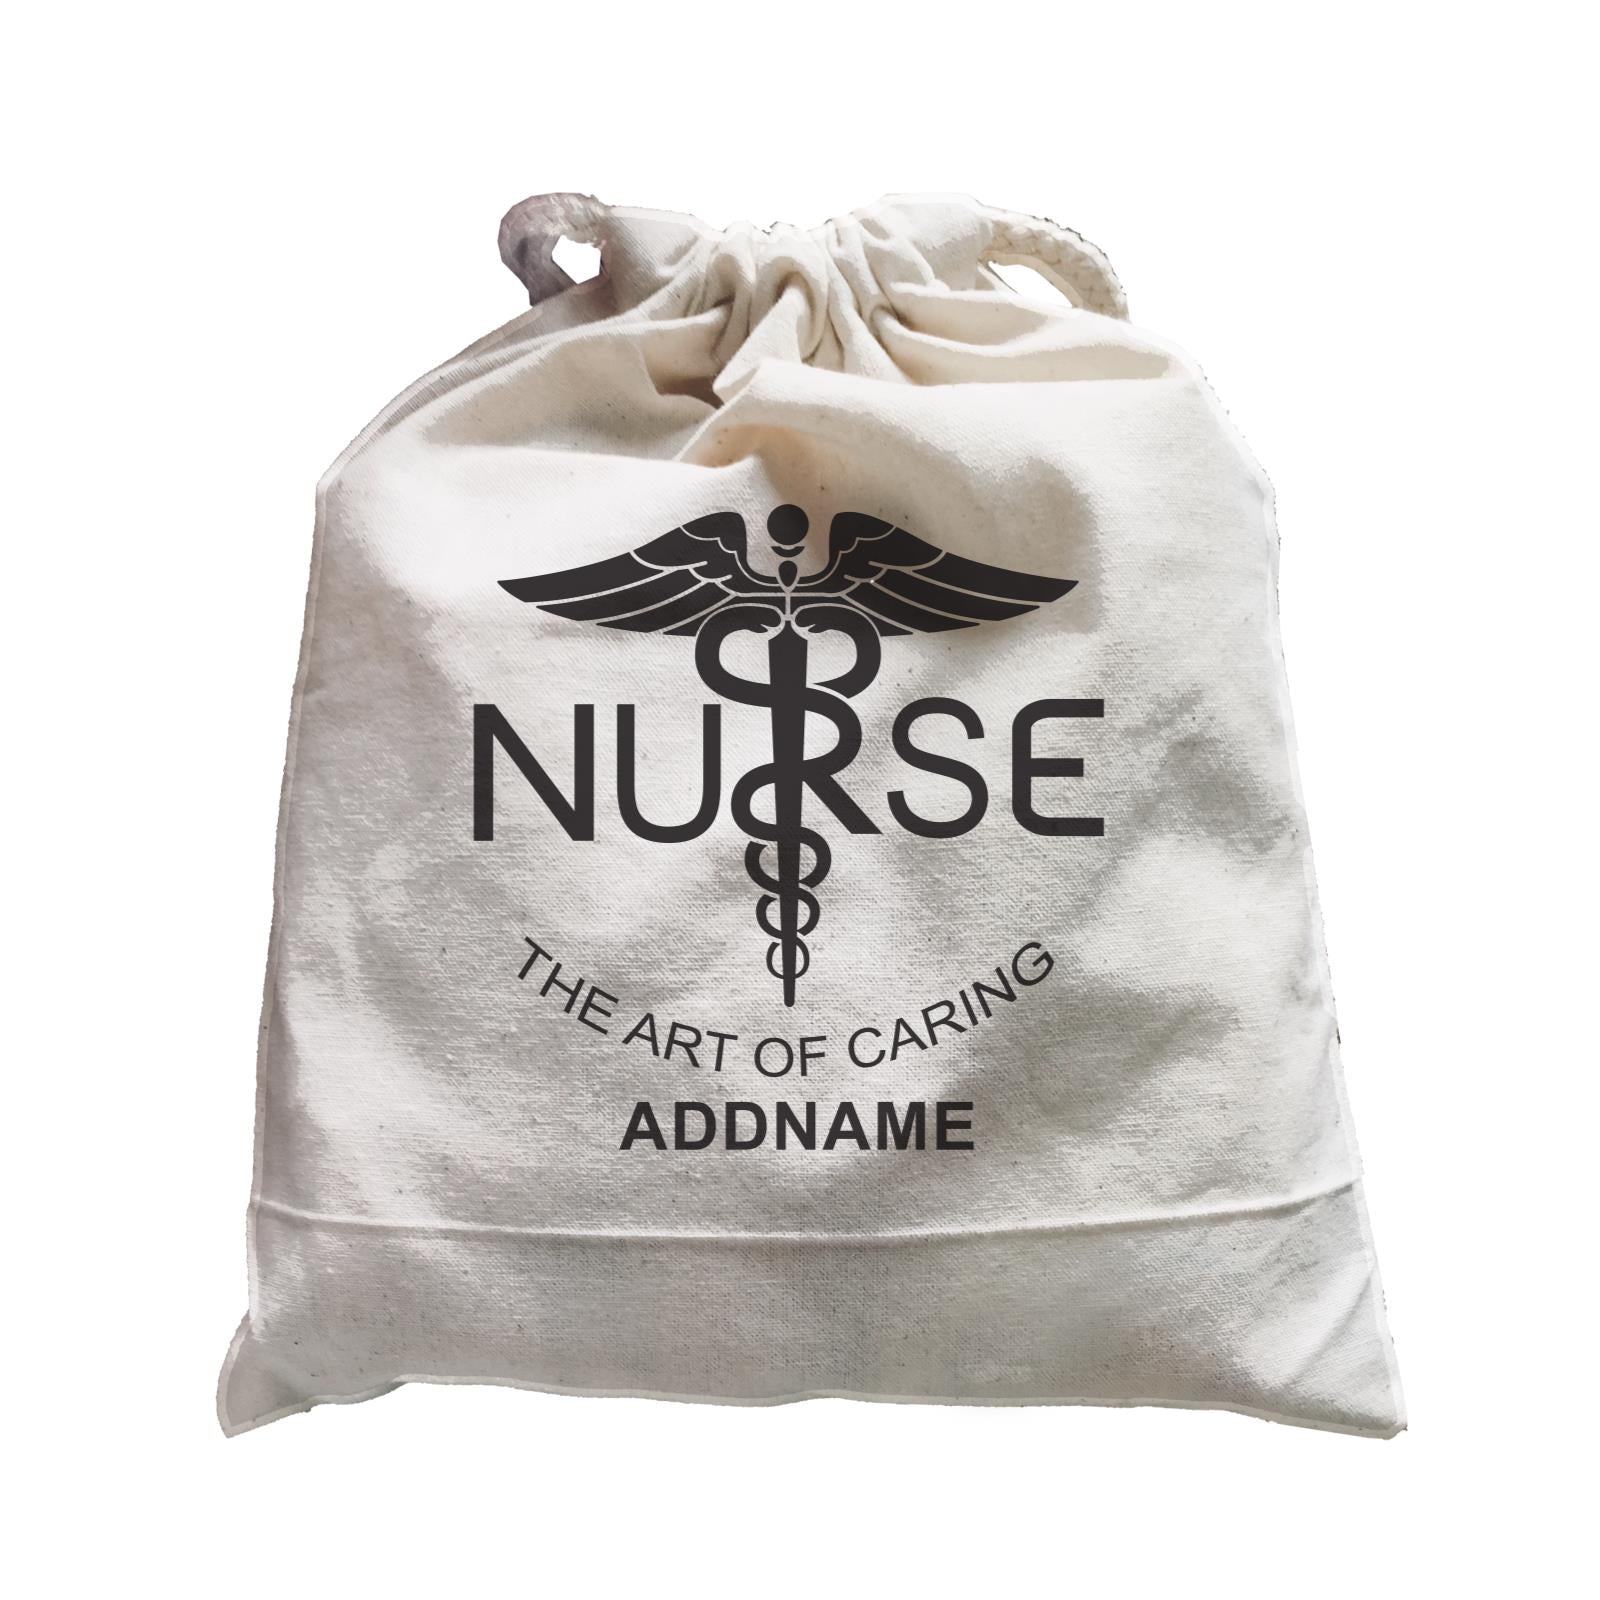 Nurse Quotes The Art Of Caring Addname Satchel